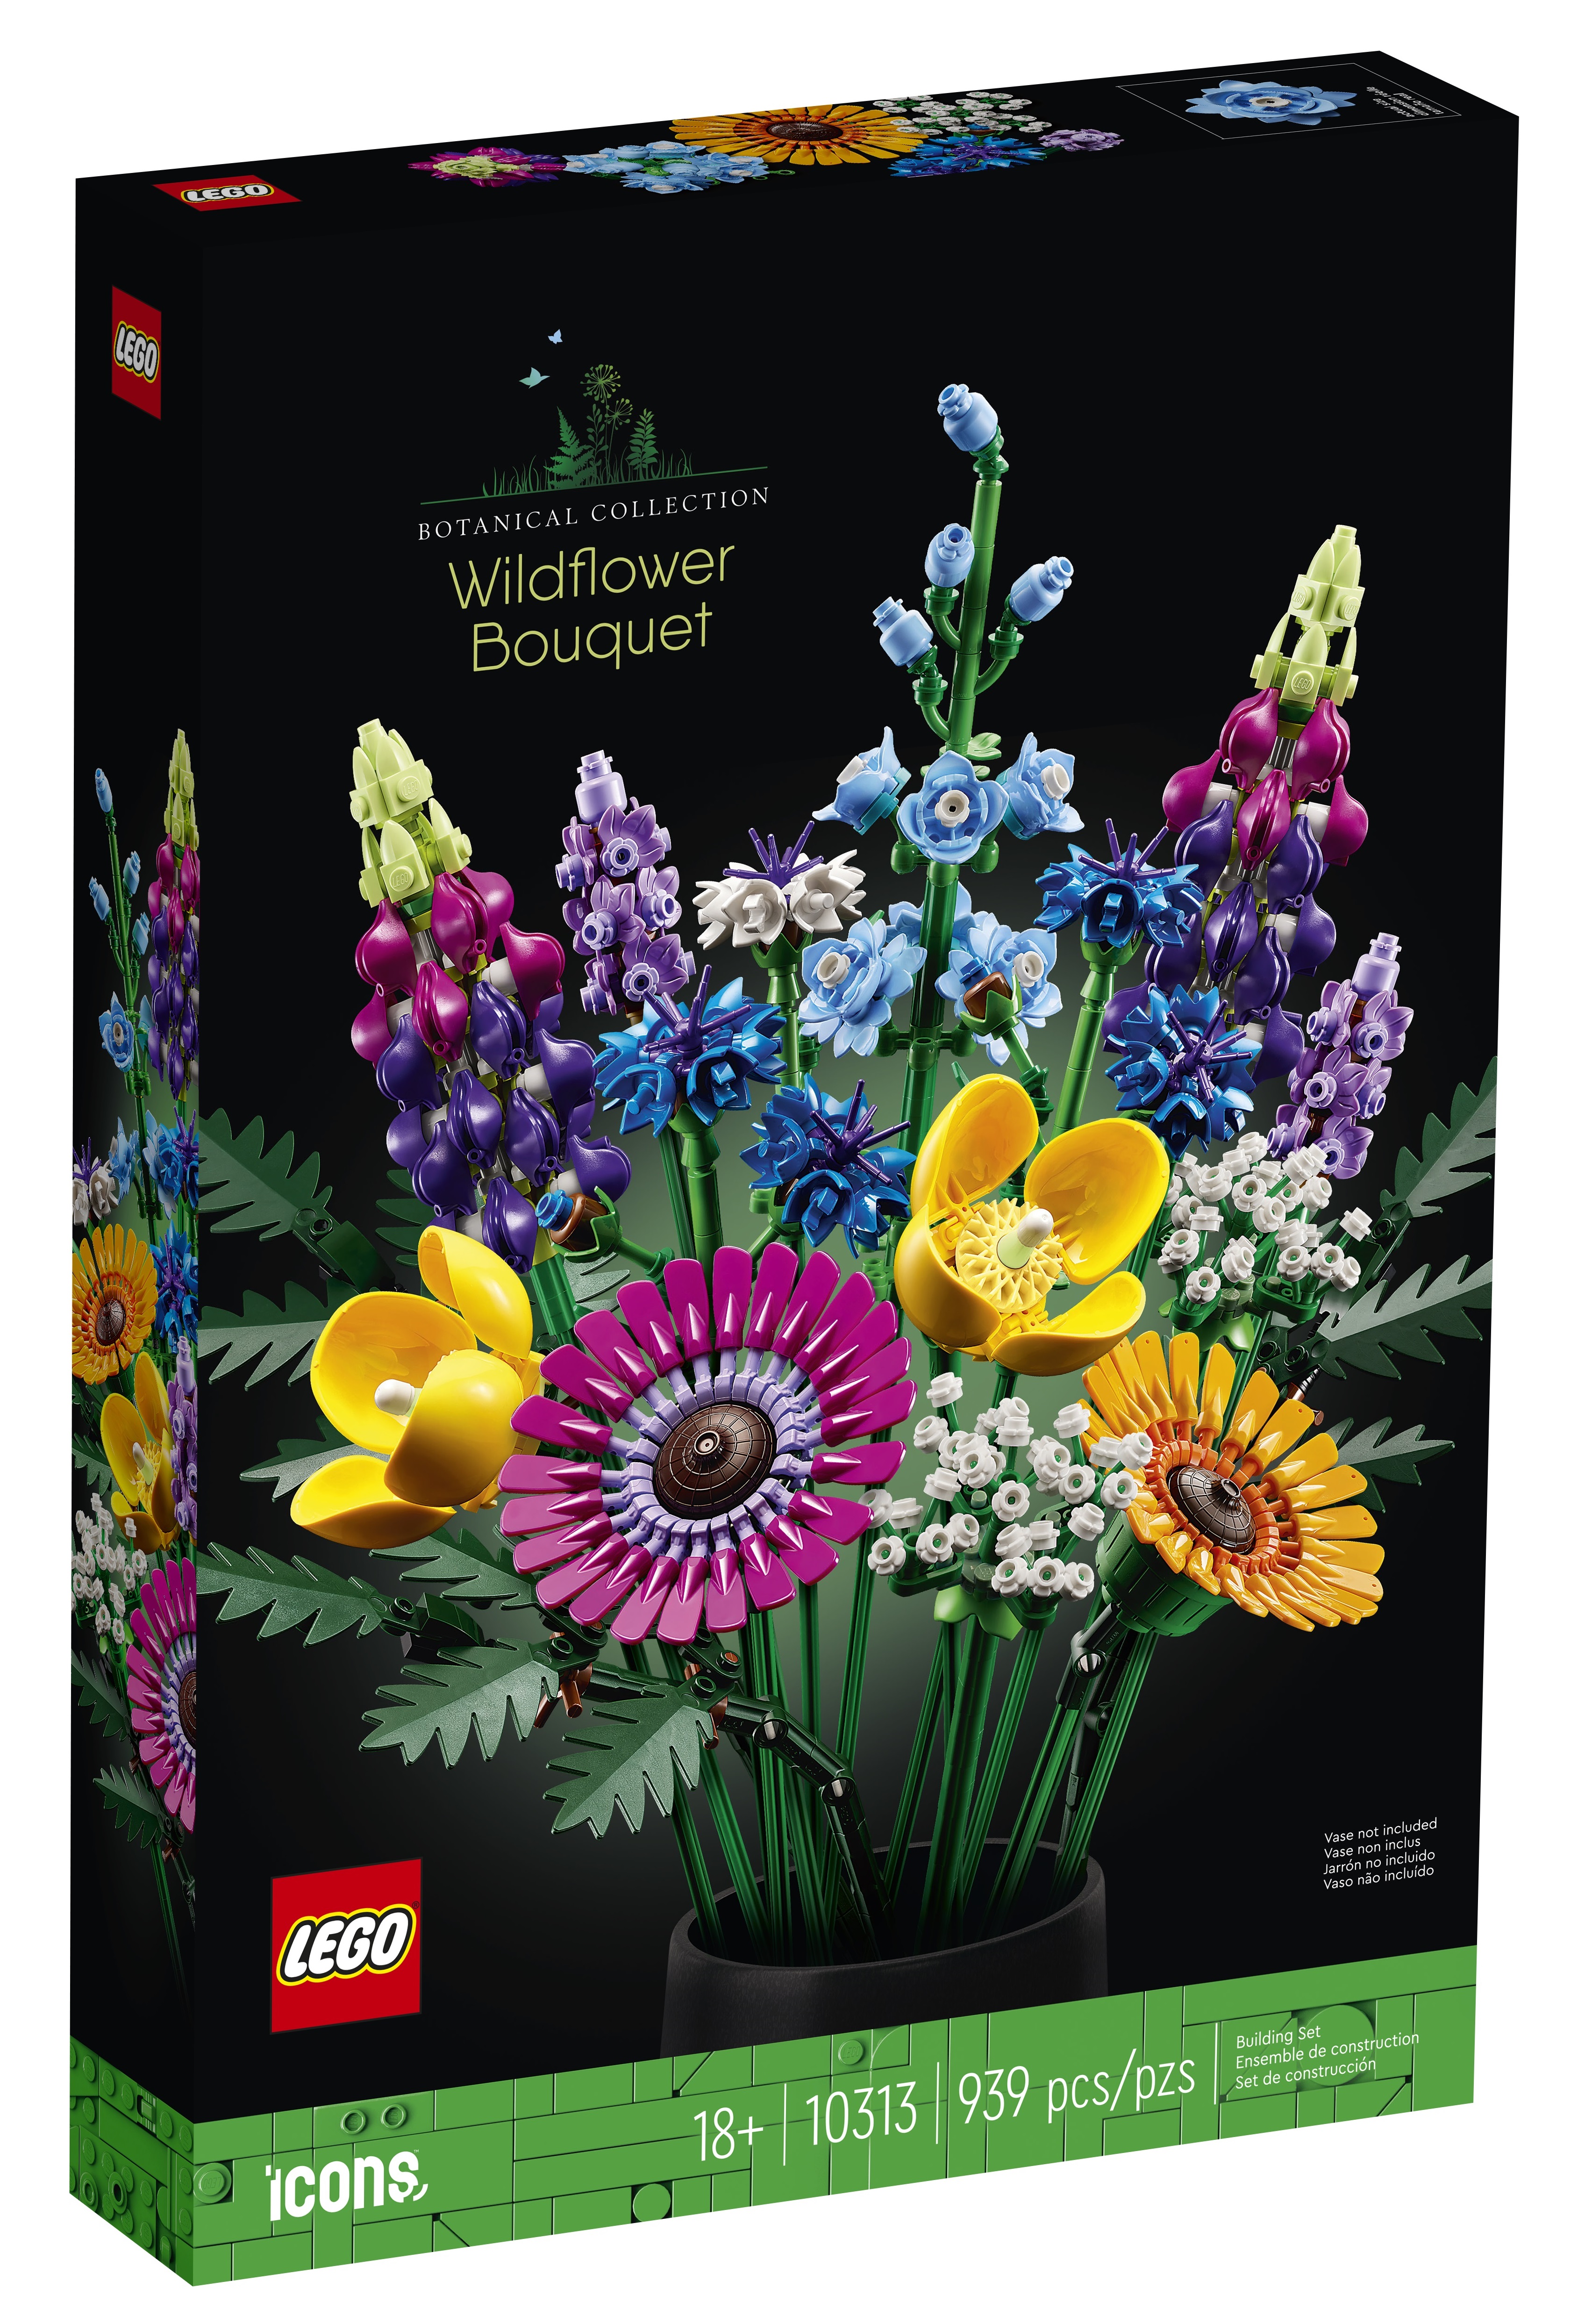 LEGO officially reveals 10313 Wildflower Bouquet and 10314 Dried